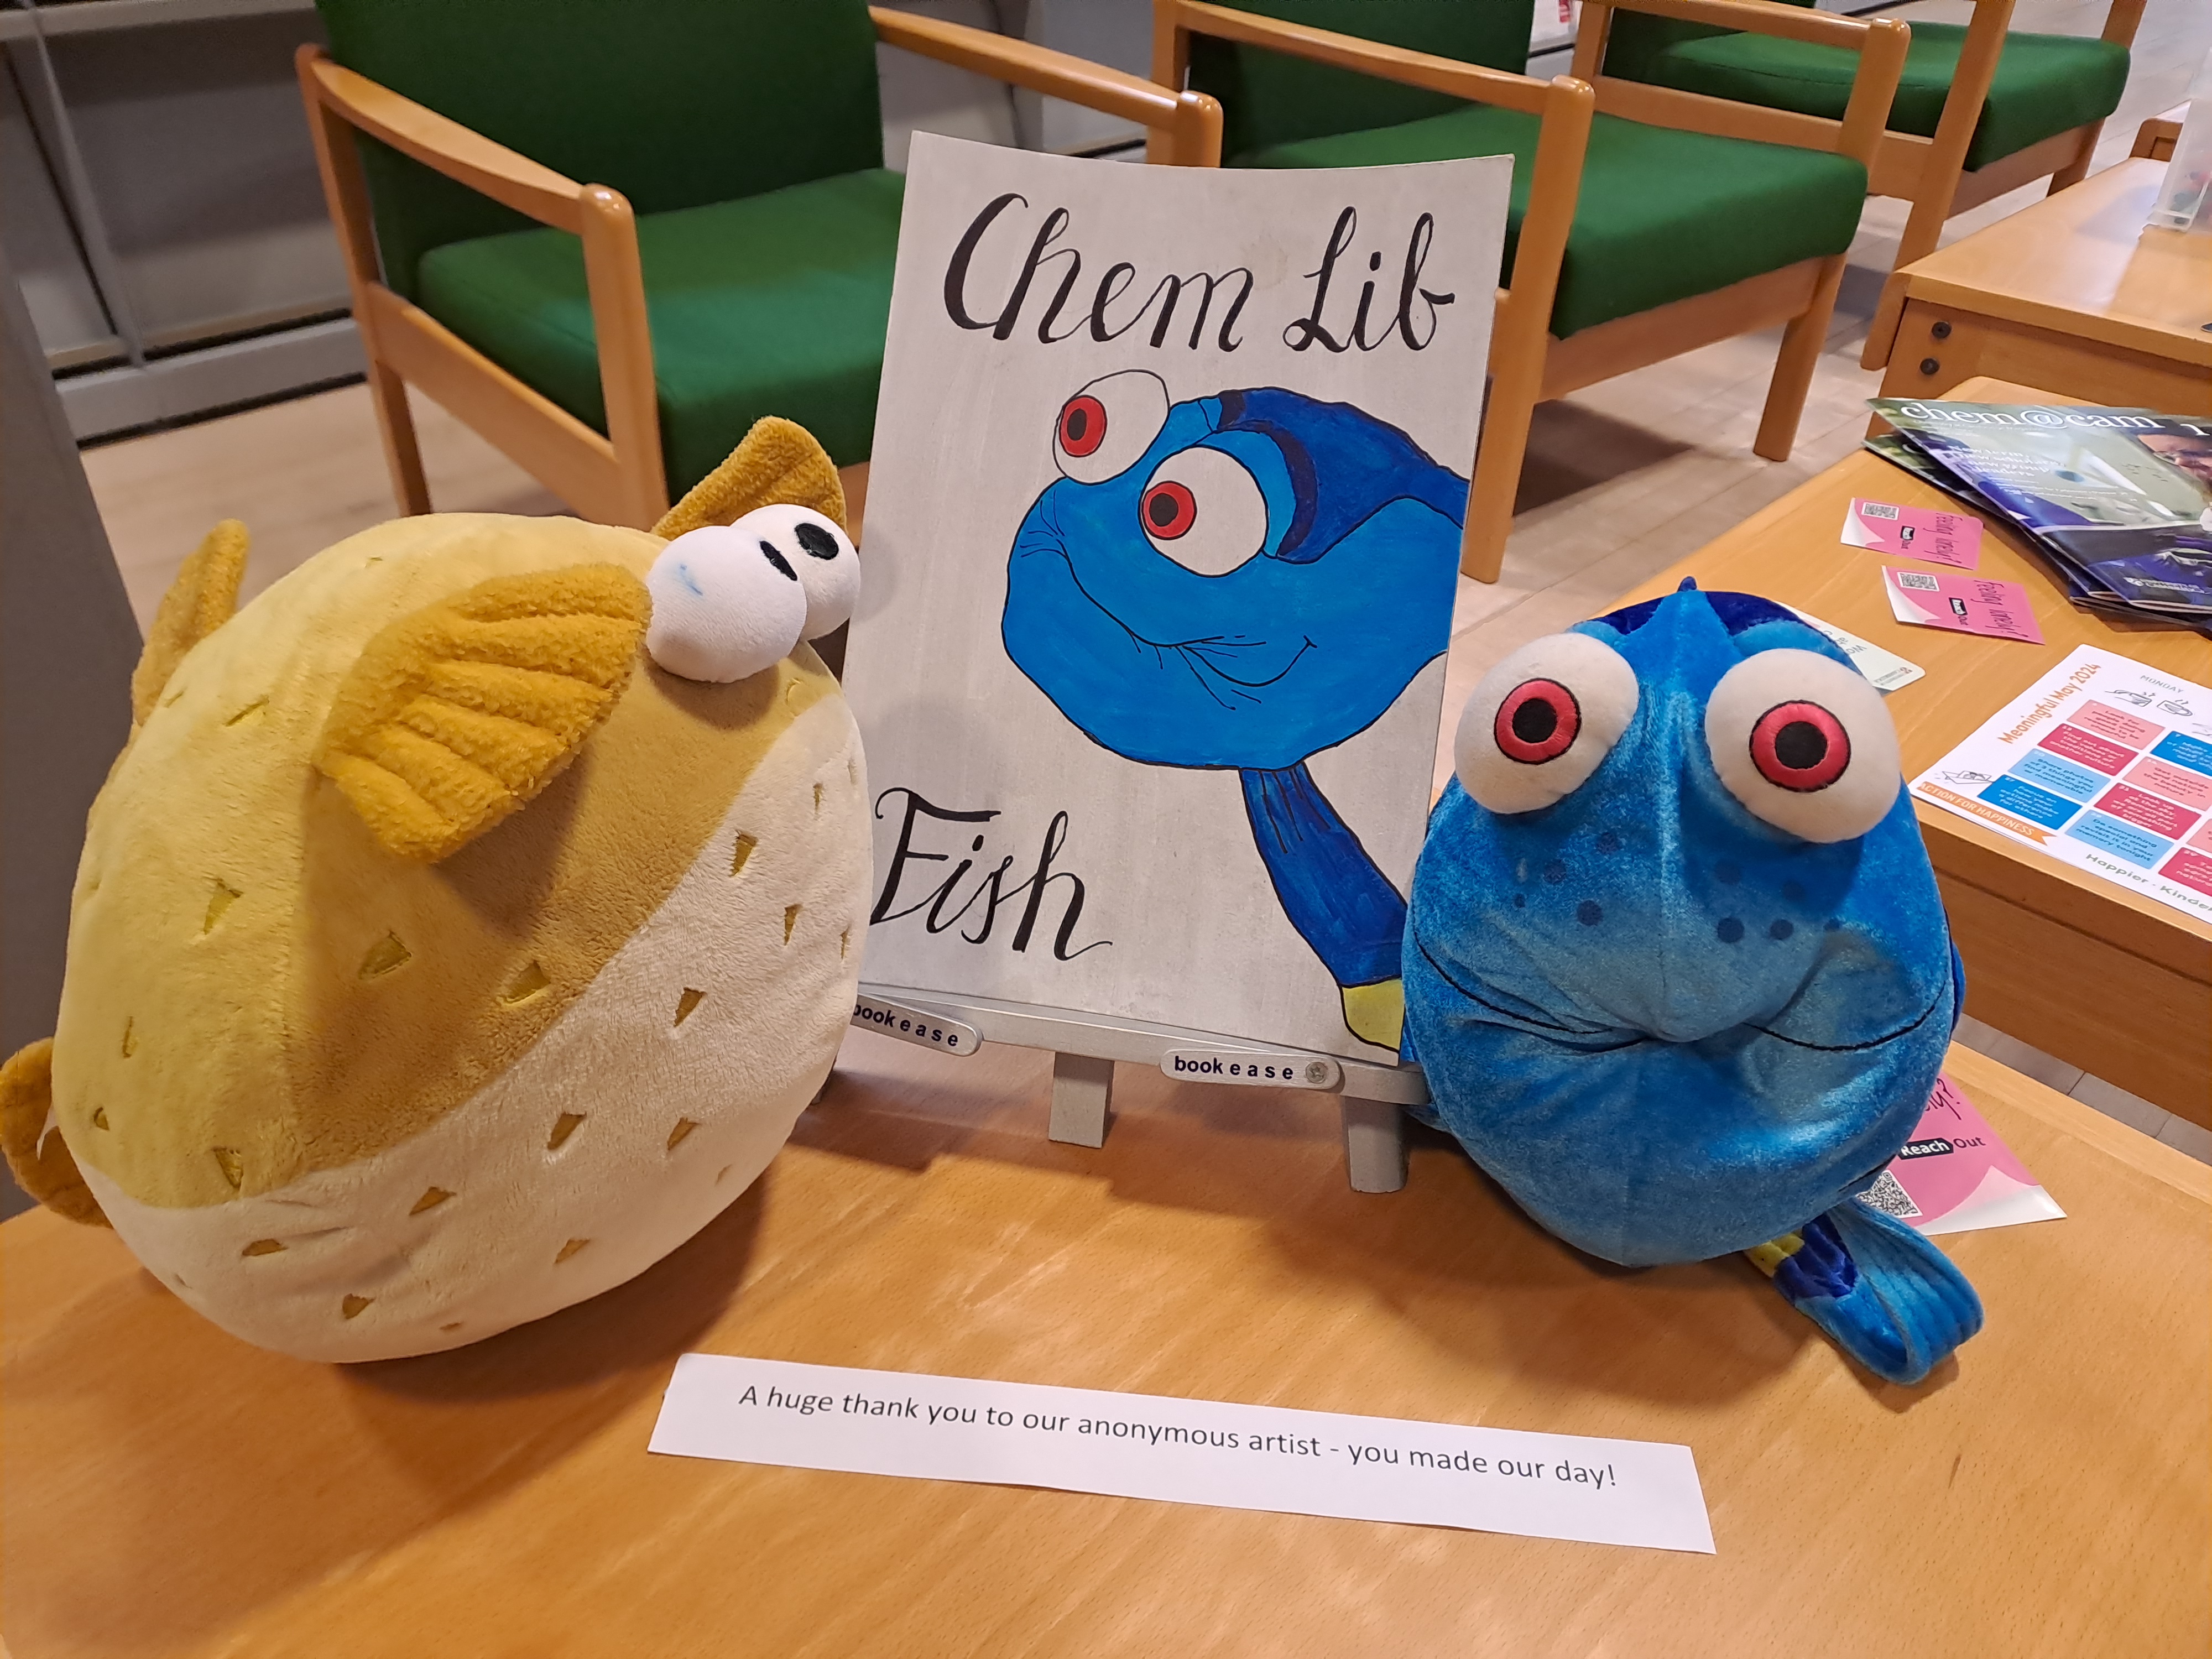 Two stuffed toy fish and a painting of one of the fish